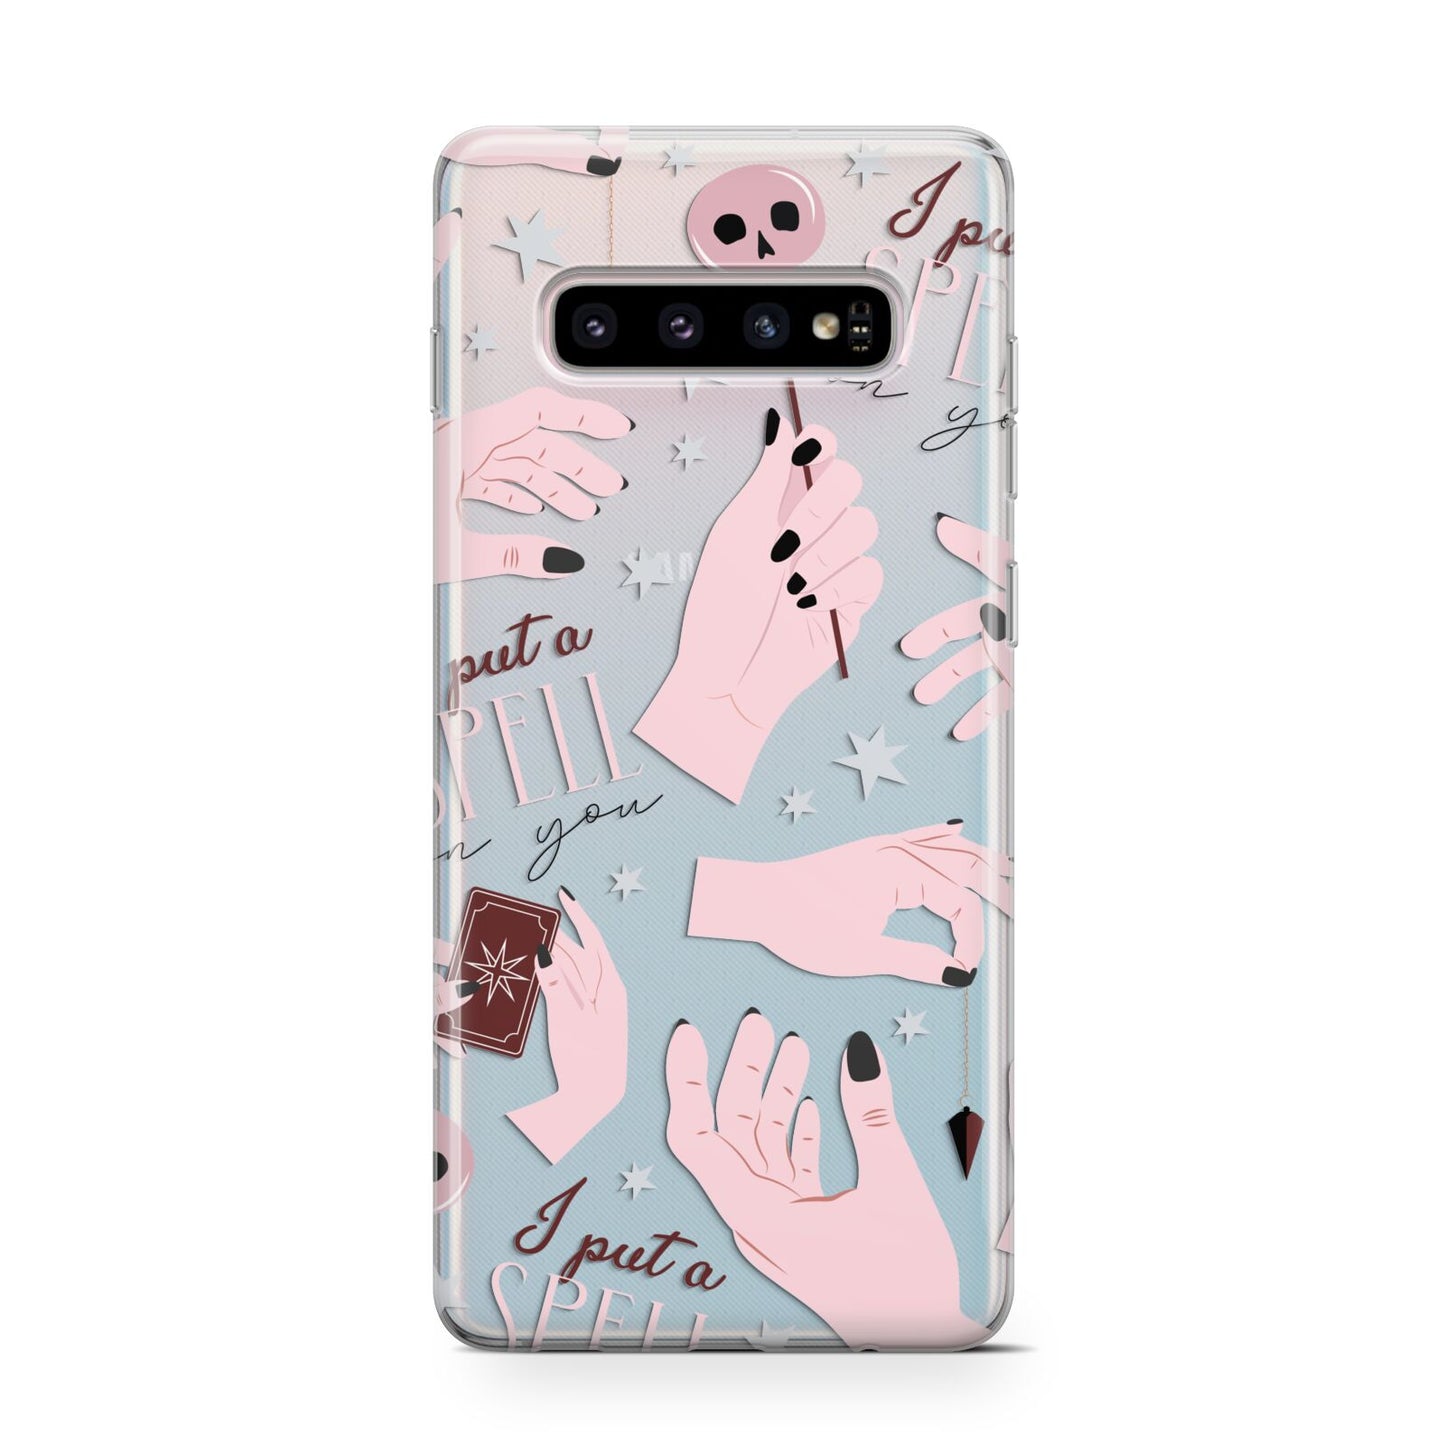 Witches Hands and Tarot Cards Samsung Galaxy S10 Case